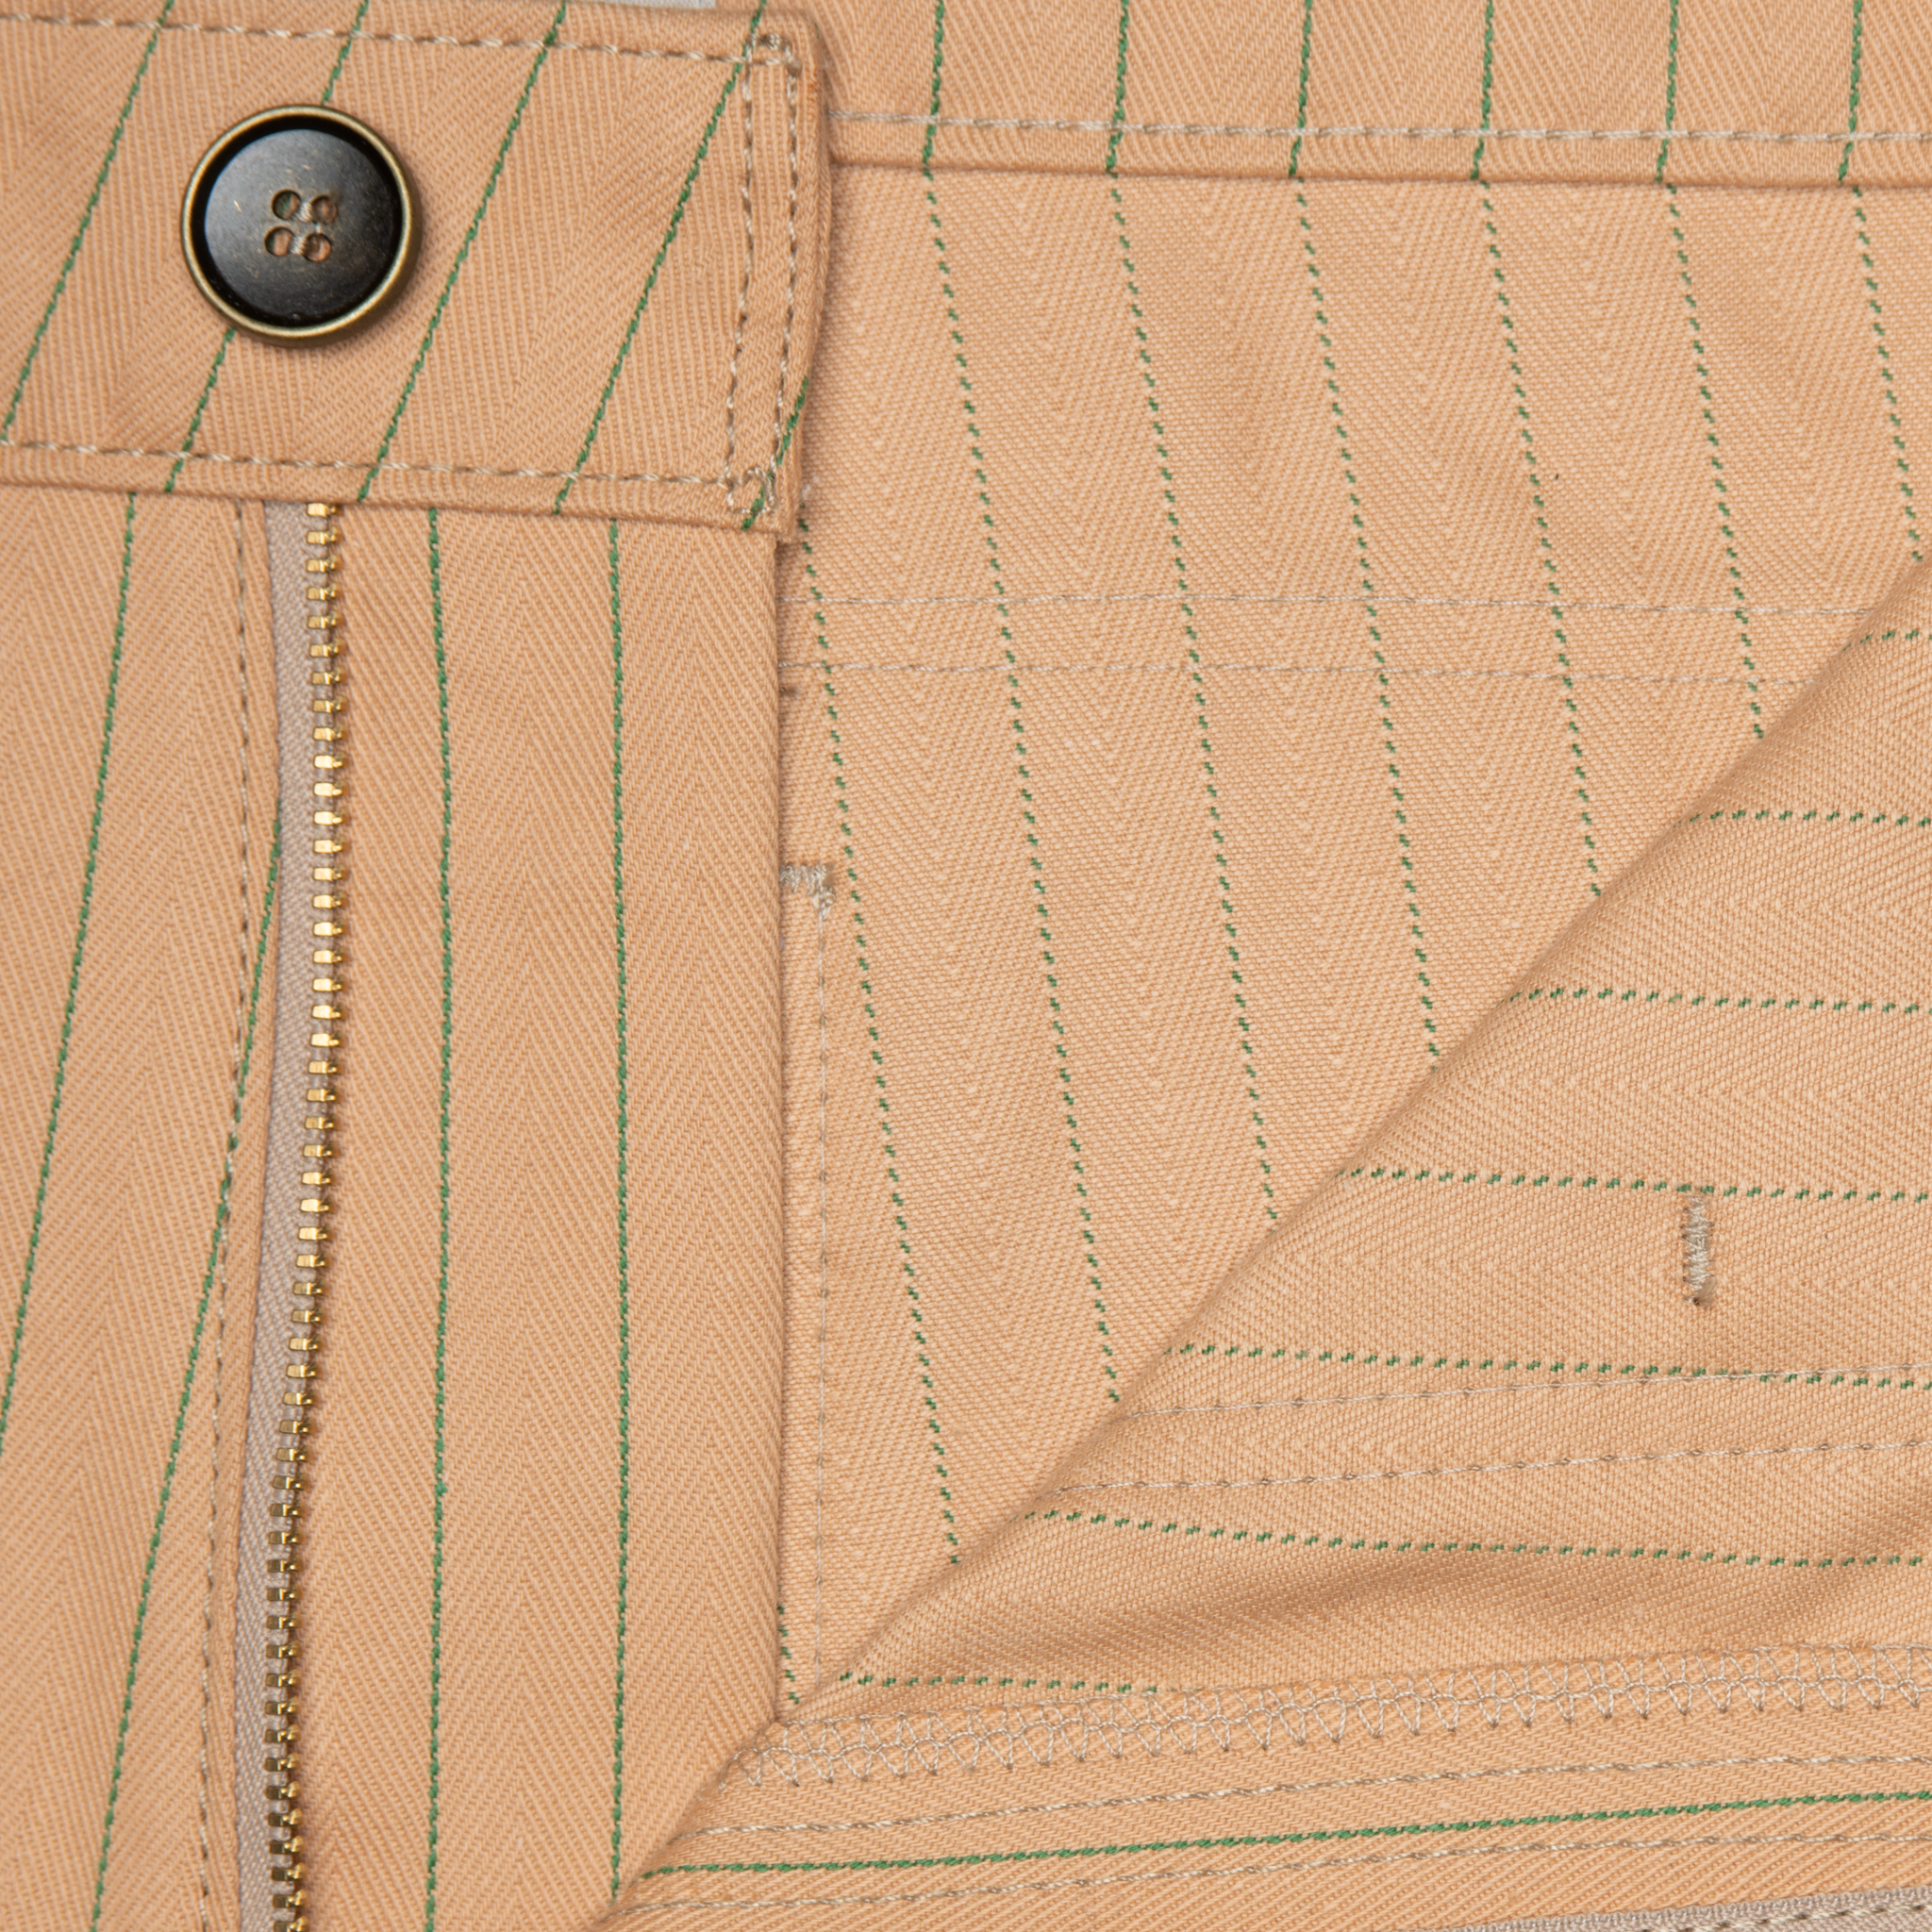  Work Pant - Repro Workwear Twill Peach - zip fly 